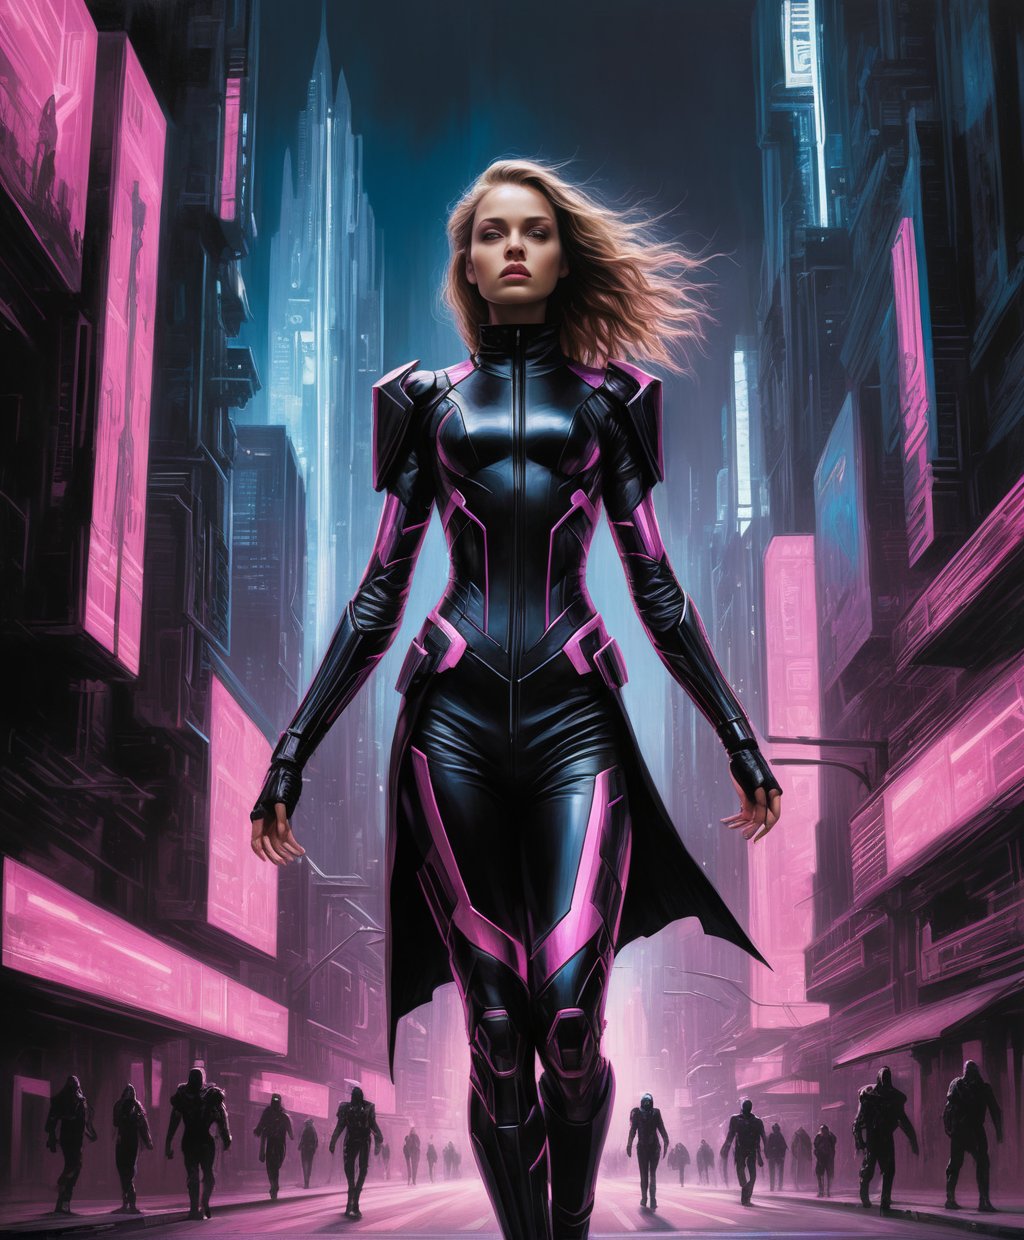 (Imaginary Photo:1.3) of (Sketched:1.3) a young woman wearing black costume walks down the street with her arms raised, in the style of cyberpunk futurism, light magenta and light bronze, fenghua zhong, highly detailed figures, brian despain, sergey musin, charming characters,(by Artist Trevor Brown:1.3),(by Artist Eric Kennington:1.3),(by Artist Jason Edmiston:1.3),Highly Detailed,(Crystal Cubism:1.3),(Dark Wave Art:1.3),(Primitivism:1.3),(BW:1.3)